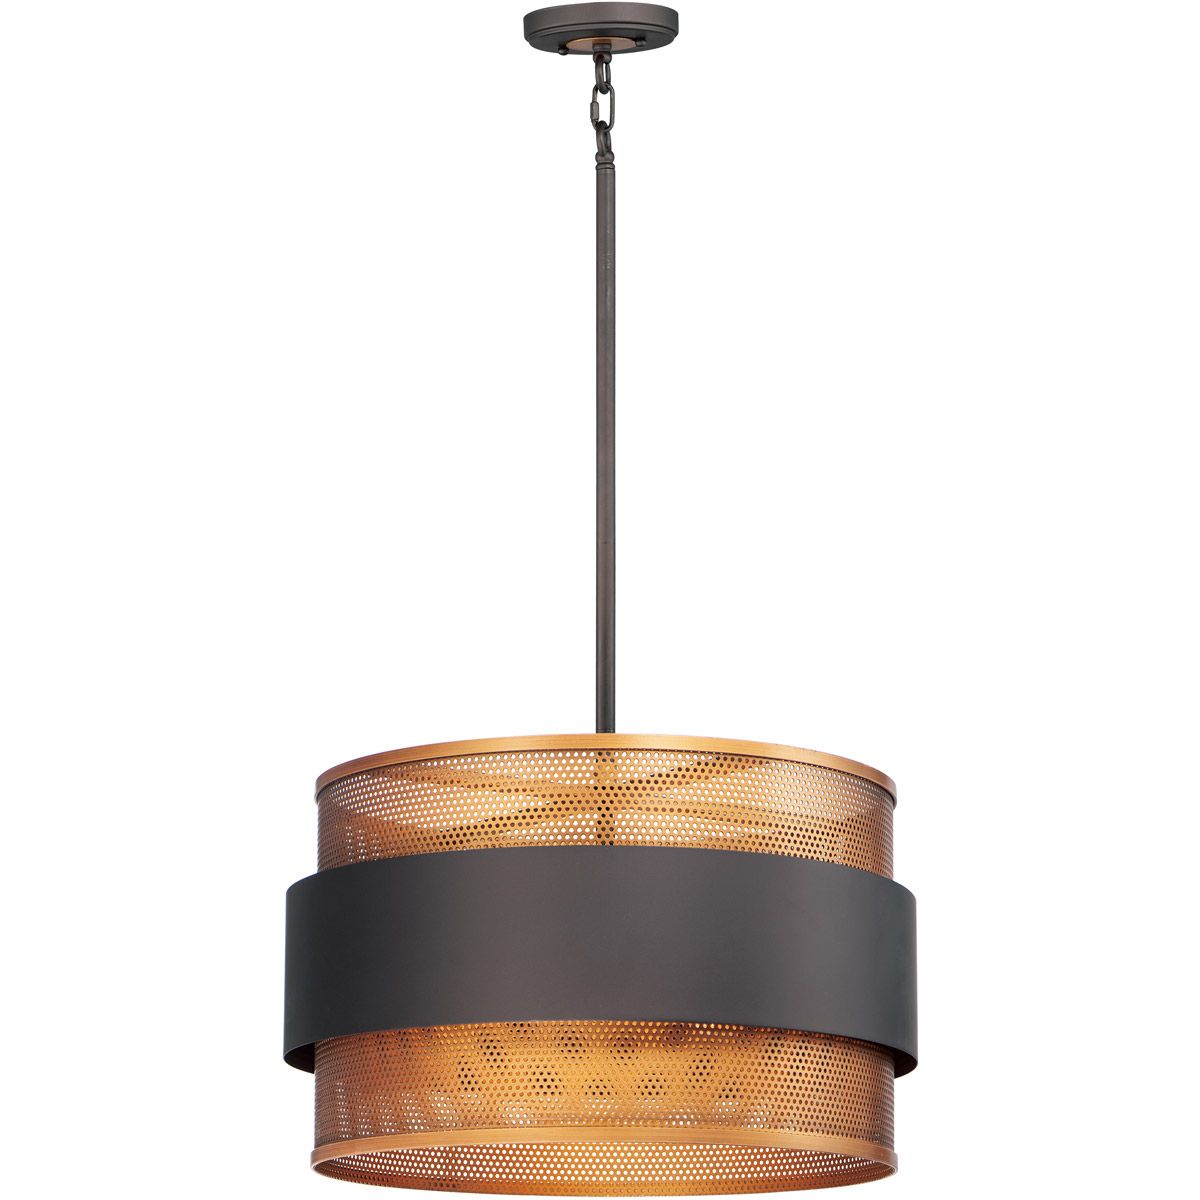 Oil Rubbed Bronze And Antique Brass Four Light Chandeliers Intended For Most Up To Date Maxim Lighting 31204oiab Caspian Pendant Oil Rubbed Bronze (View 4 of 20)